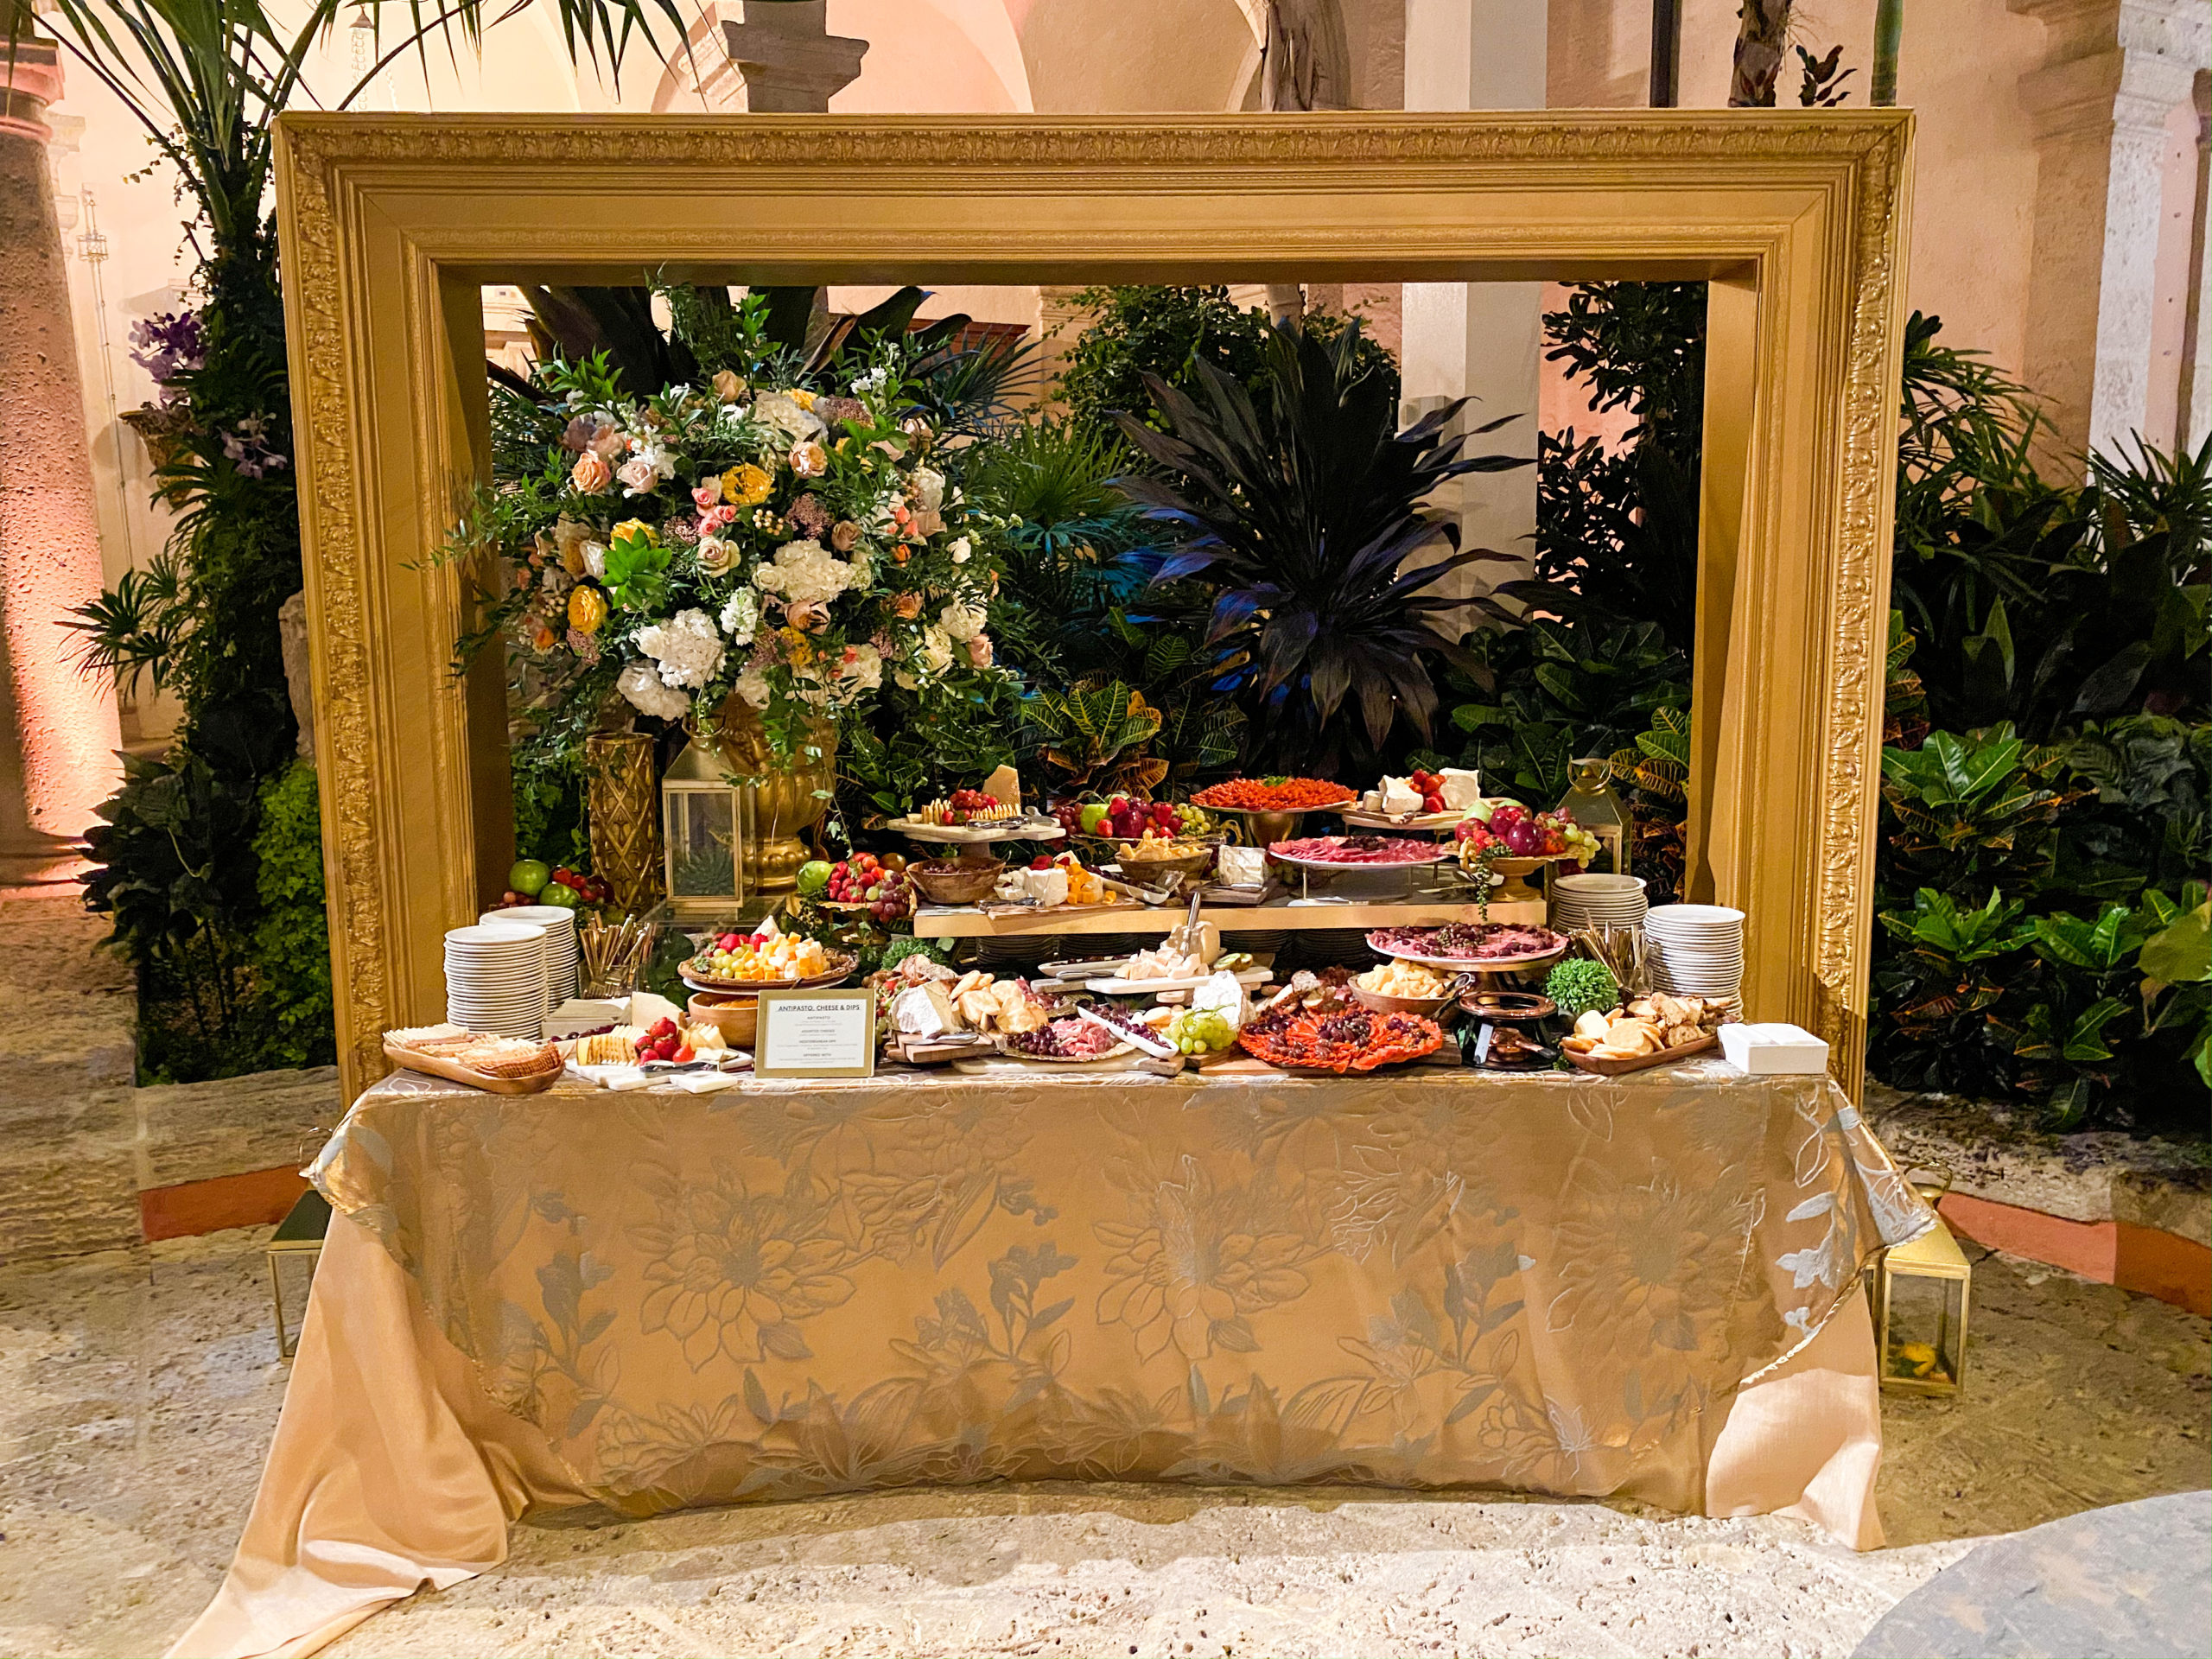 63rd Annual Vizcaya Ball, miami catering, joy wallace catering